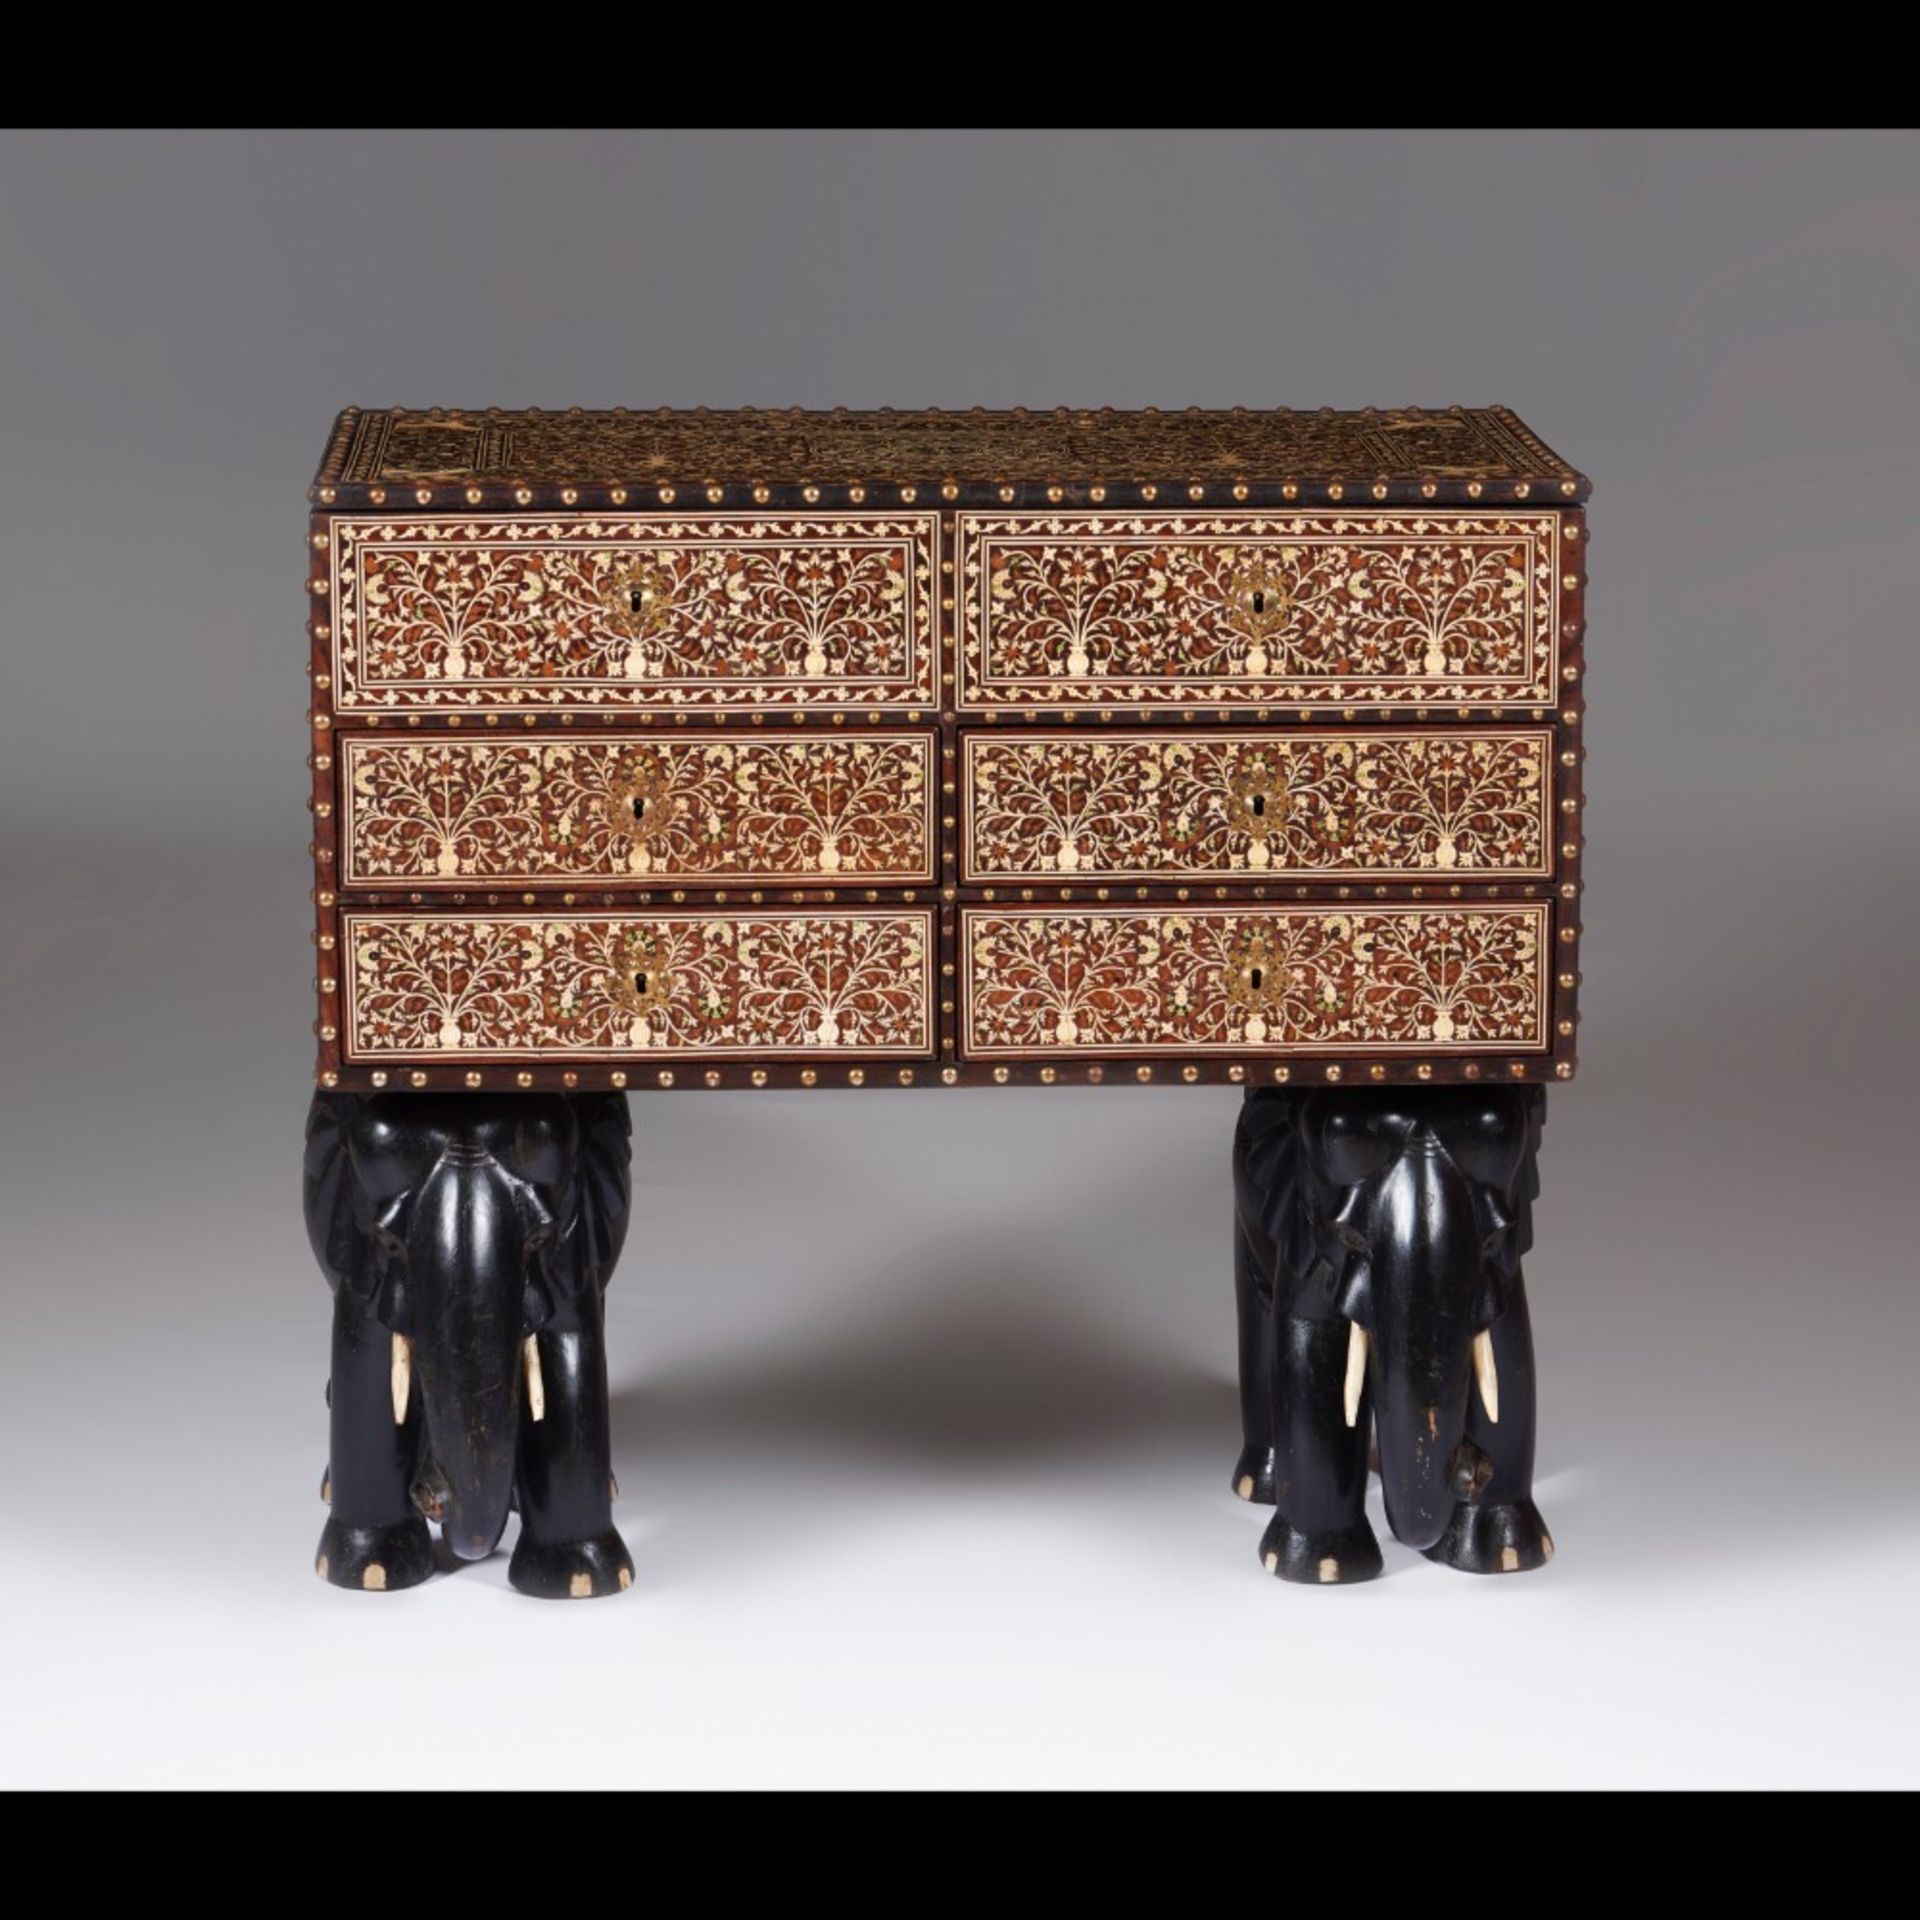  An important Chest on a stand in the shape of two elephants - Image 2 of 7